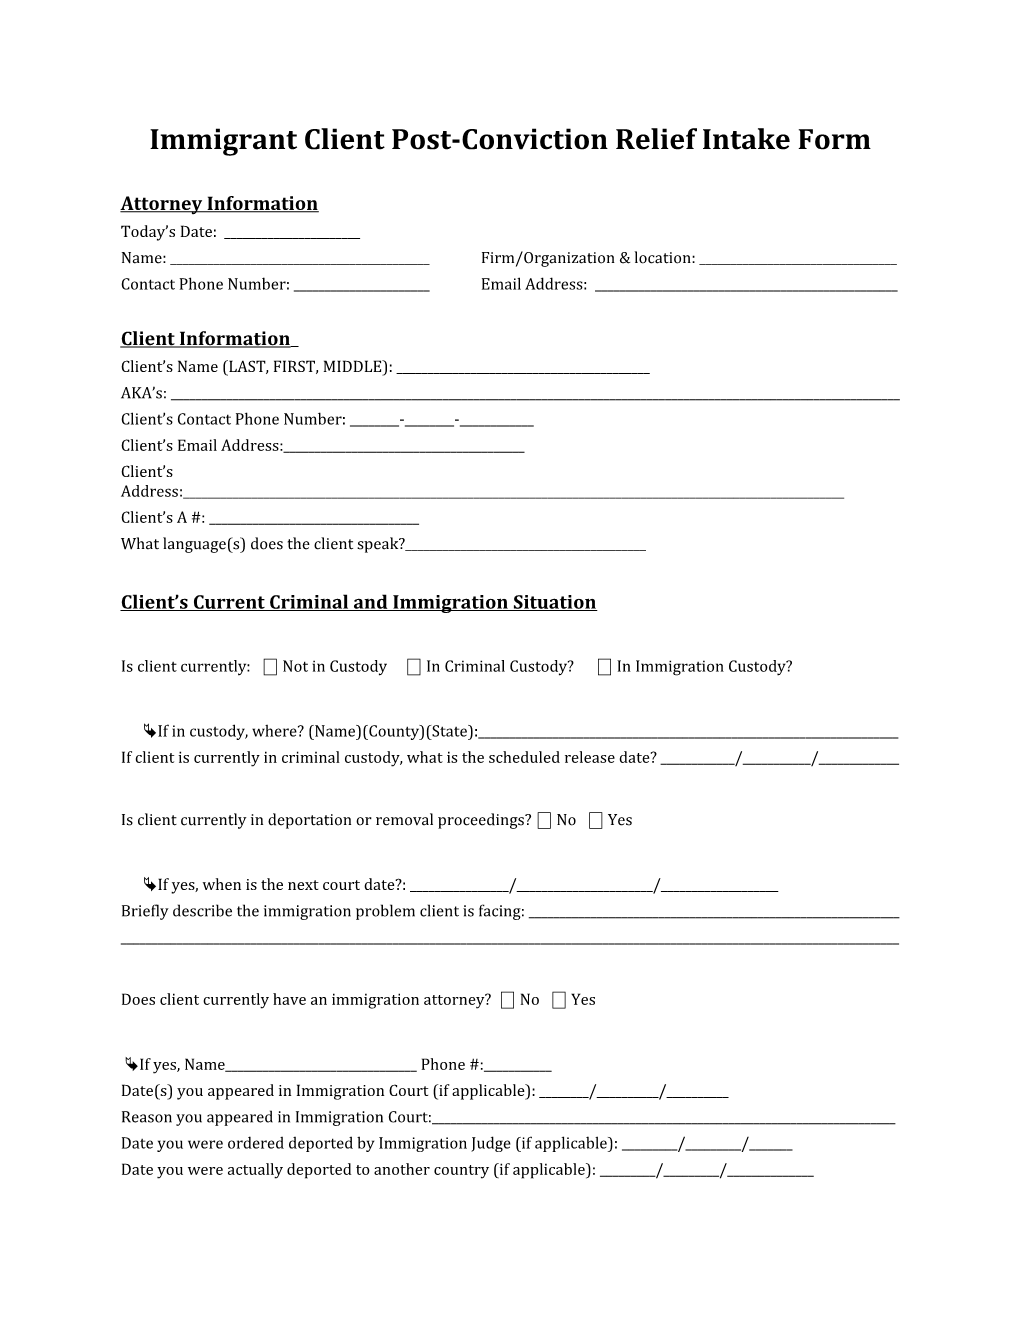 Immigrant Client Post-Conviction Relief Intake Form